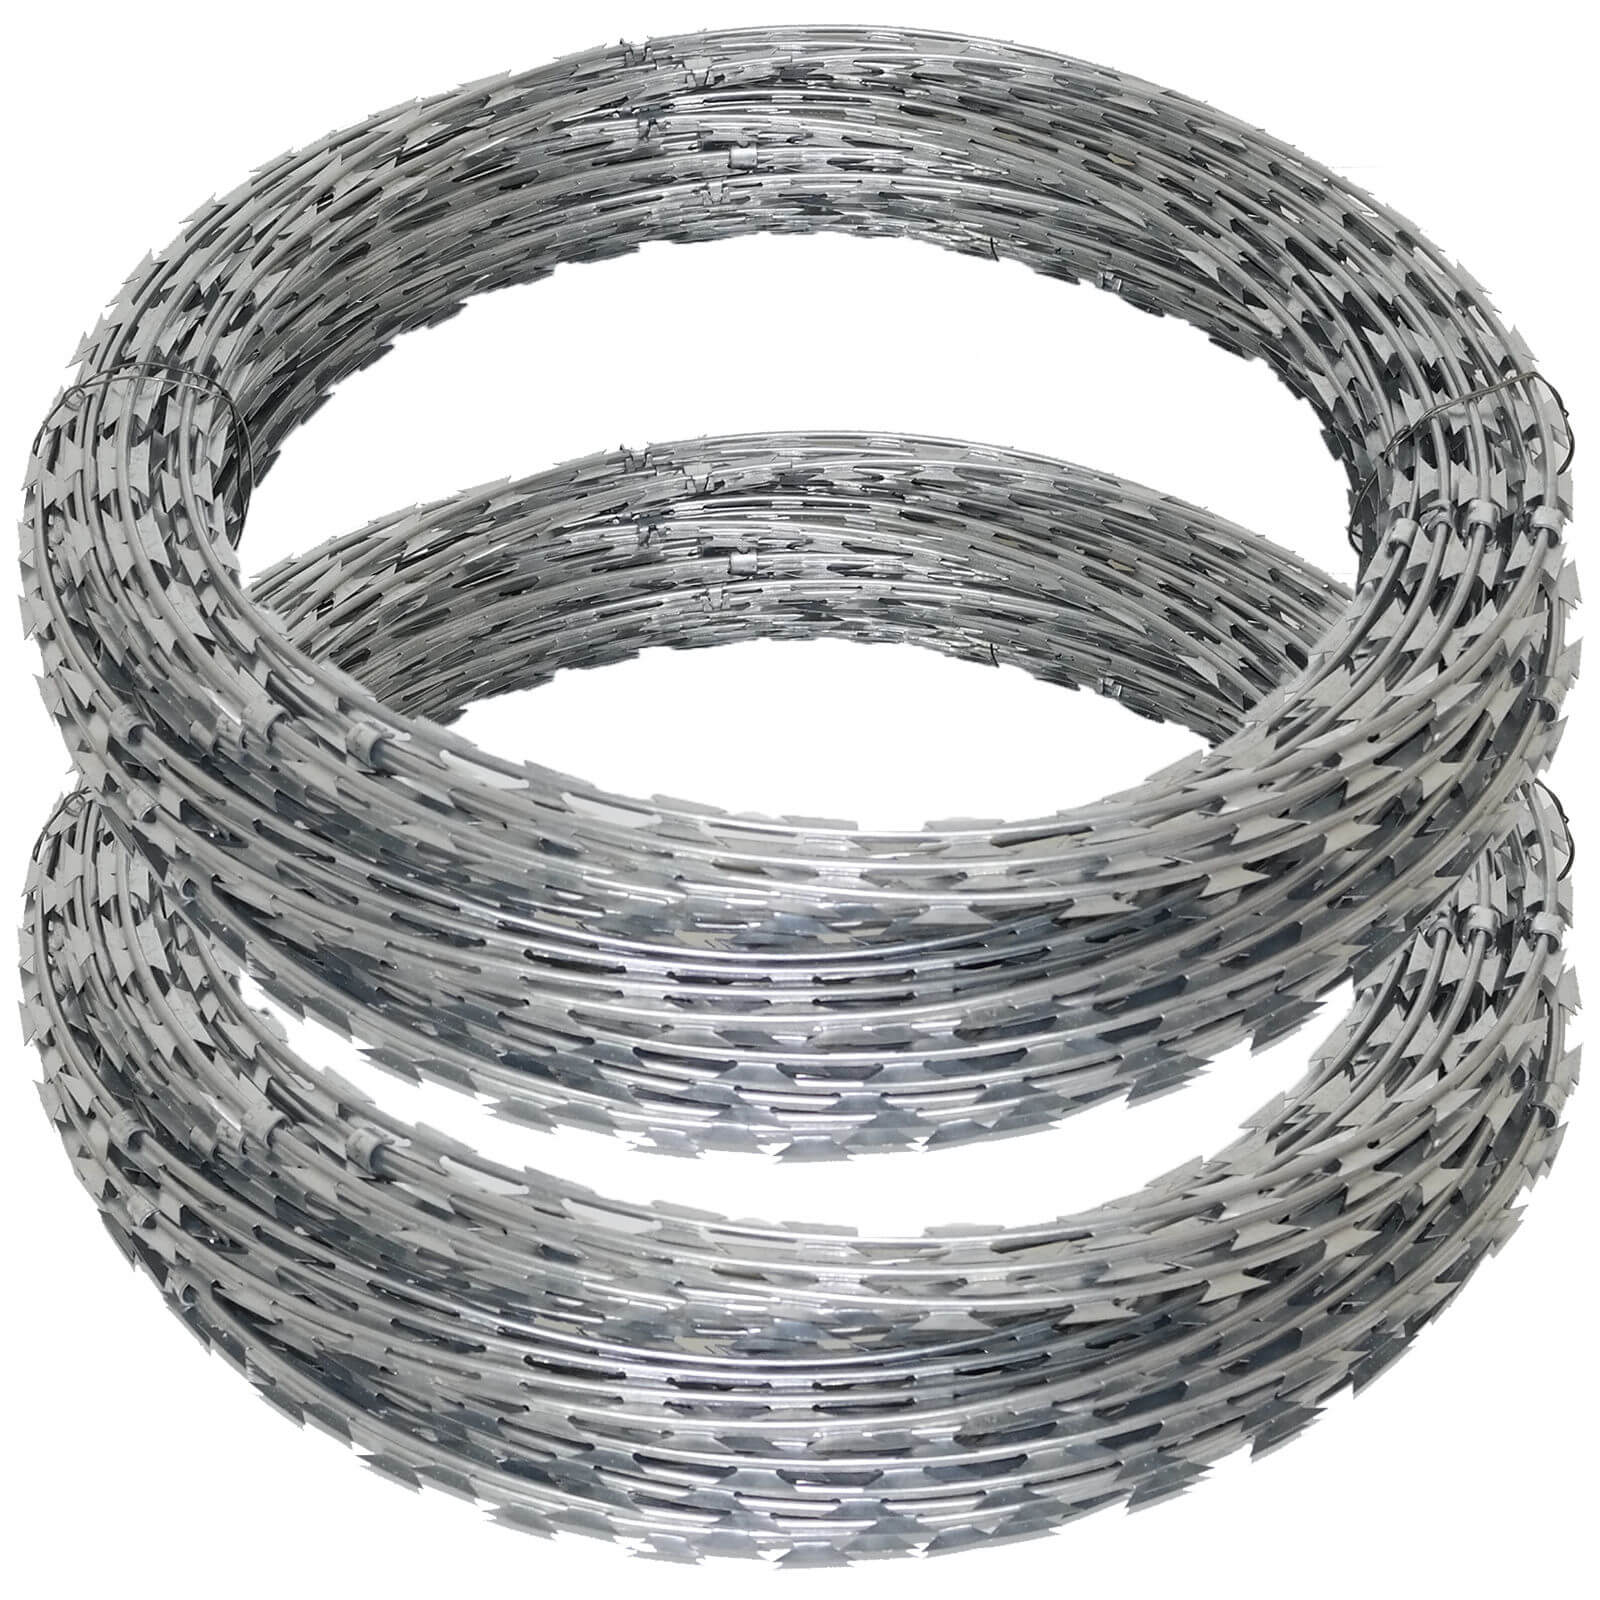 Razor wire - security that you can count on